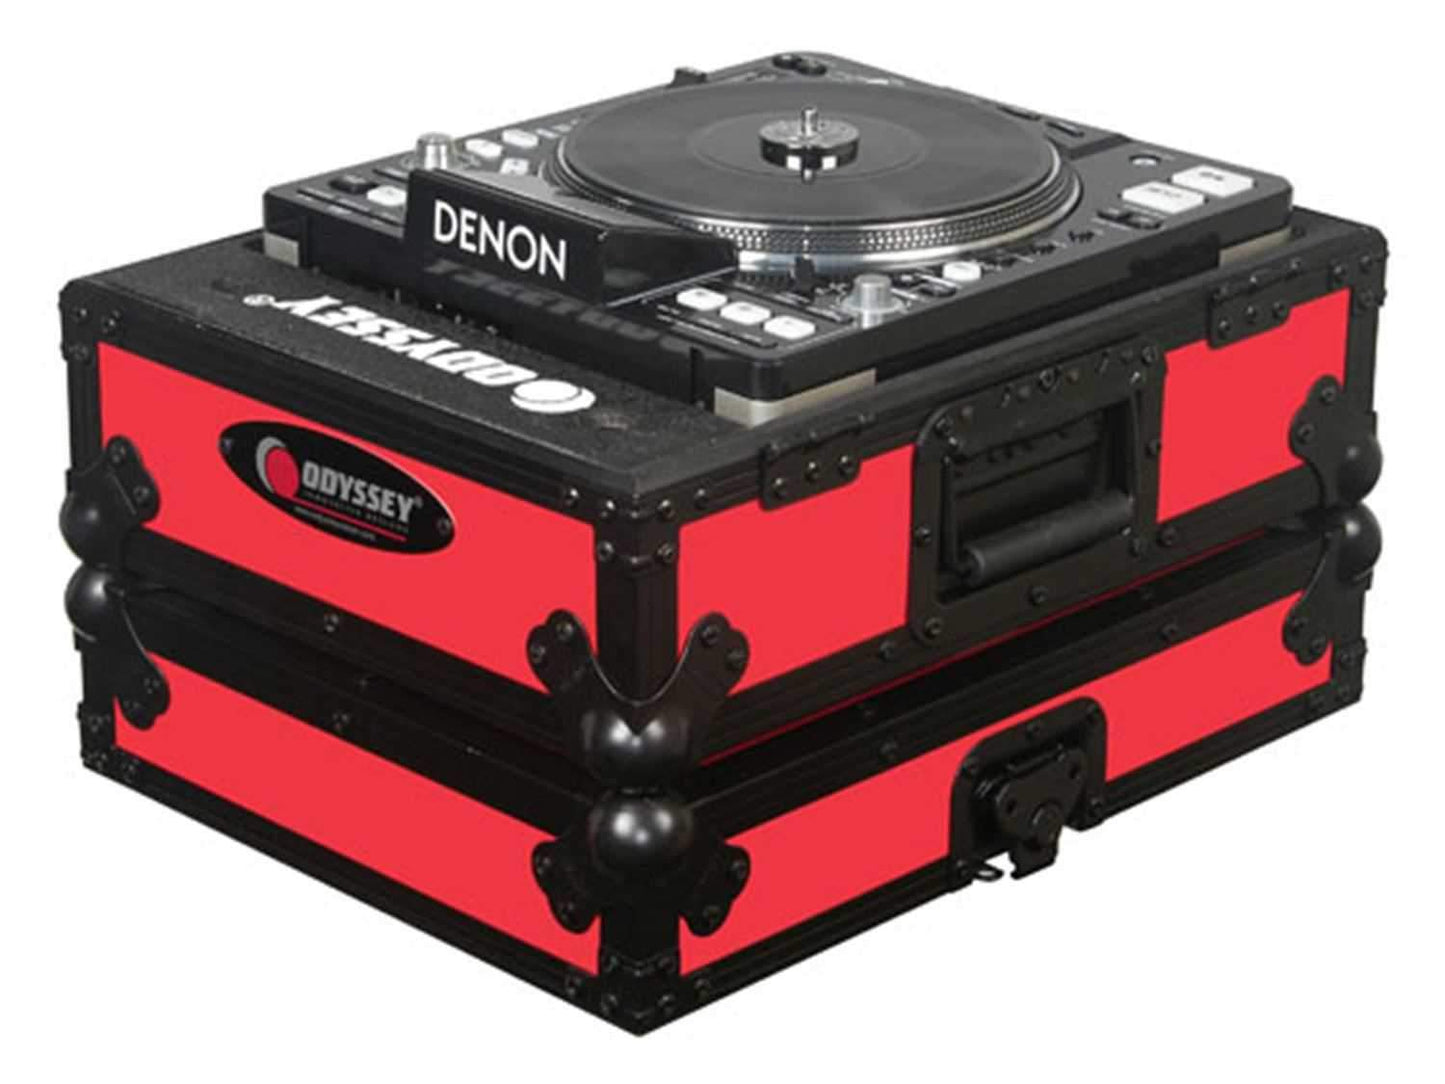 Odyssey FRCDJBKRED Red Large Format CD Player Case - ProSound and Stage Lighting